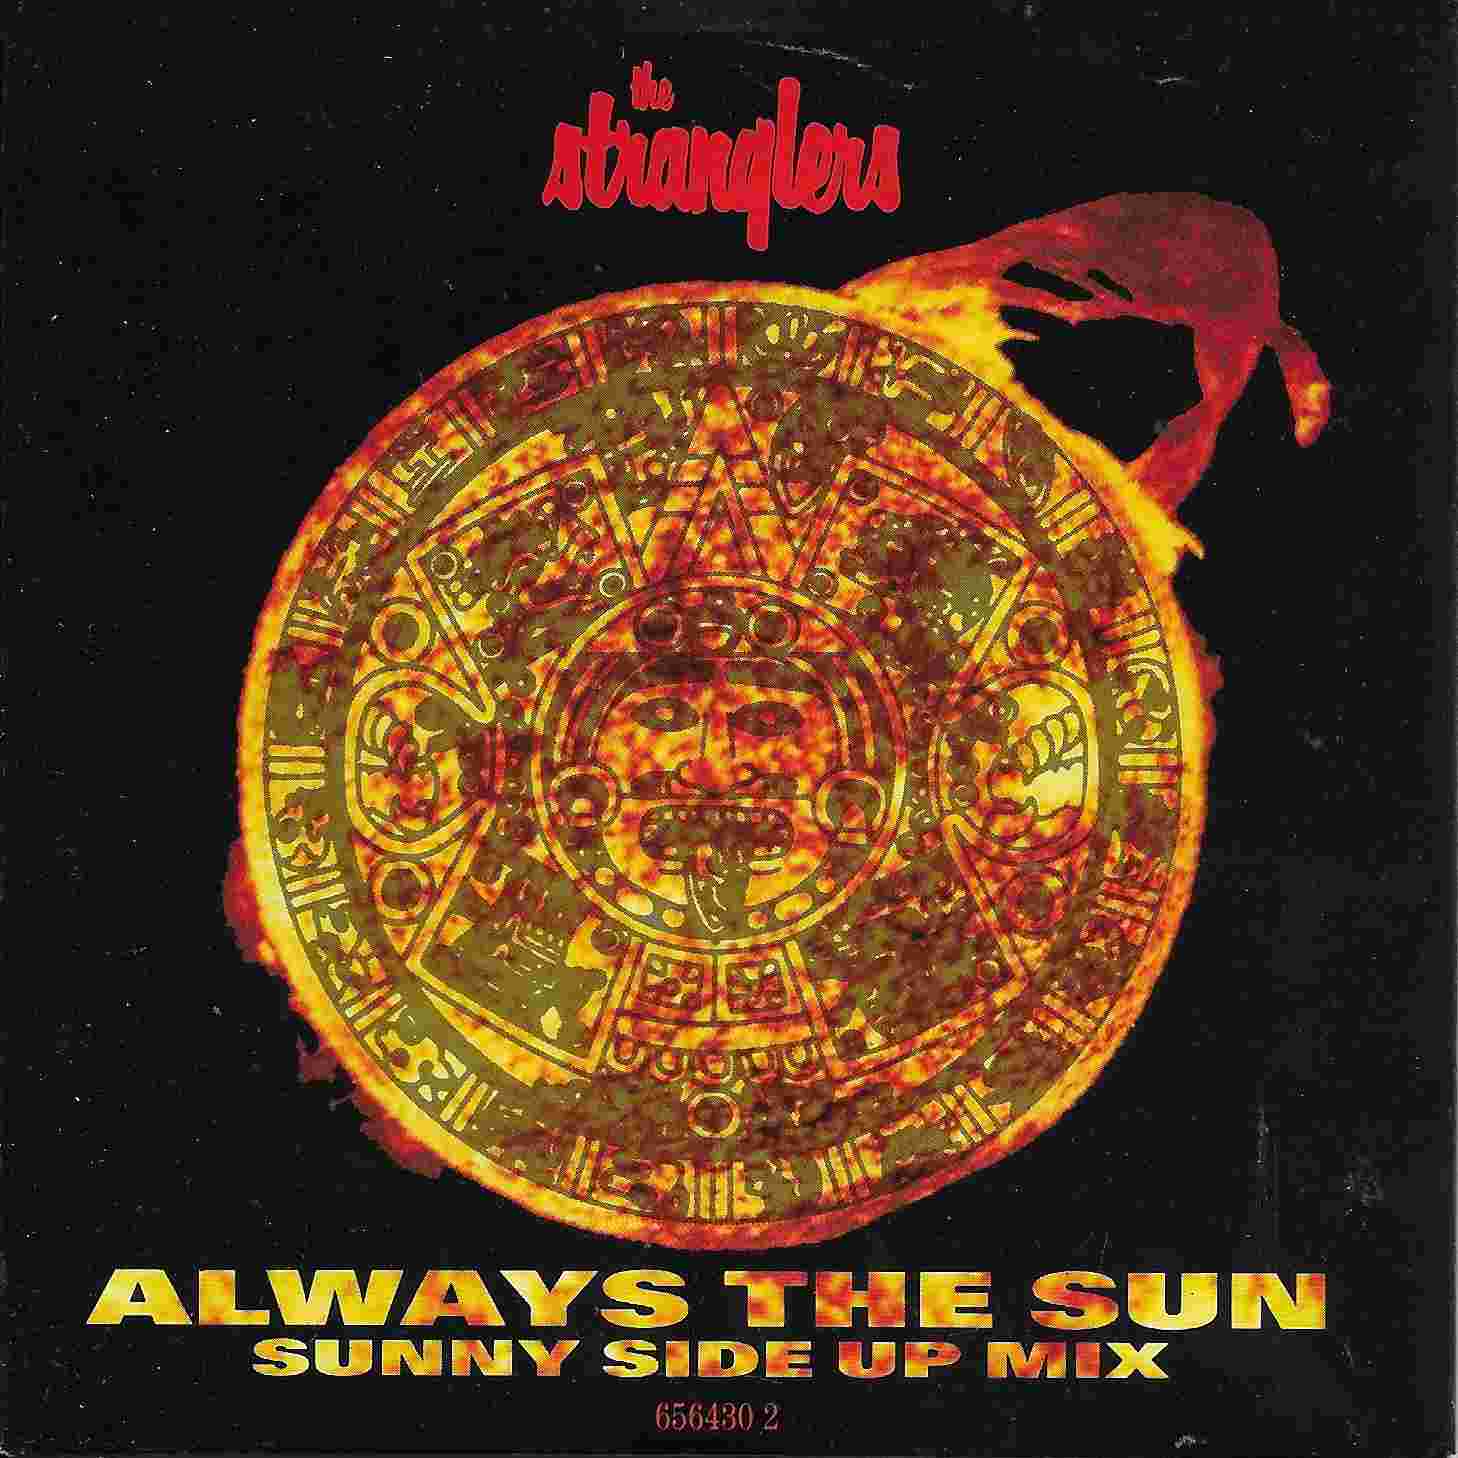 Picture of 656430 2 Always the Sun (Sunny side up mix) by artist The Stranglers from The Stranglers cdsingles